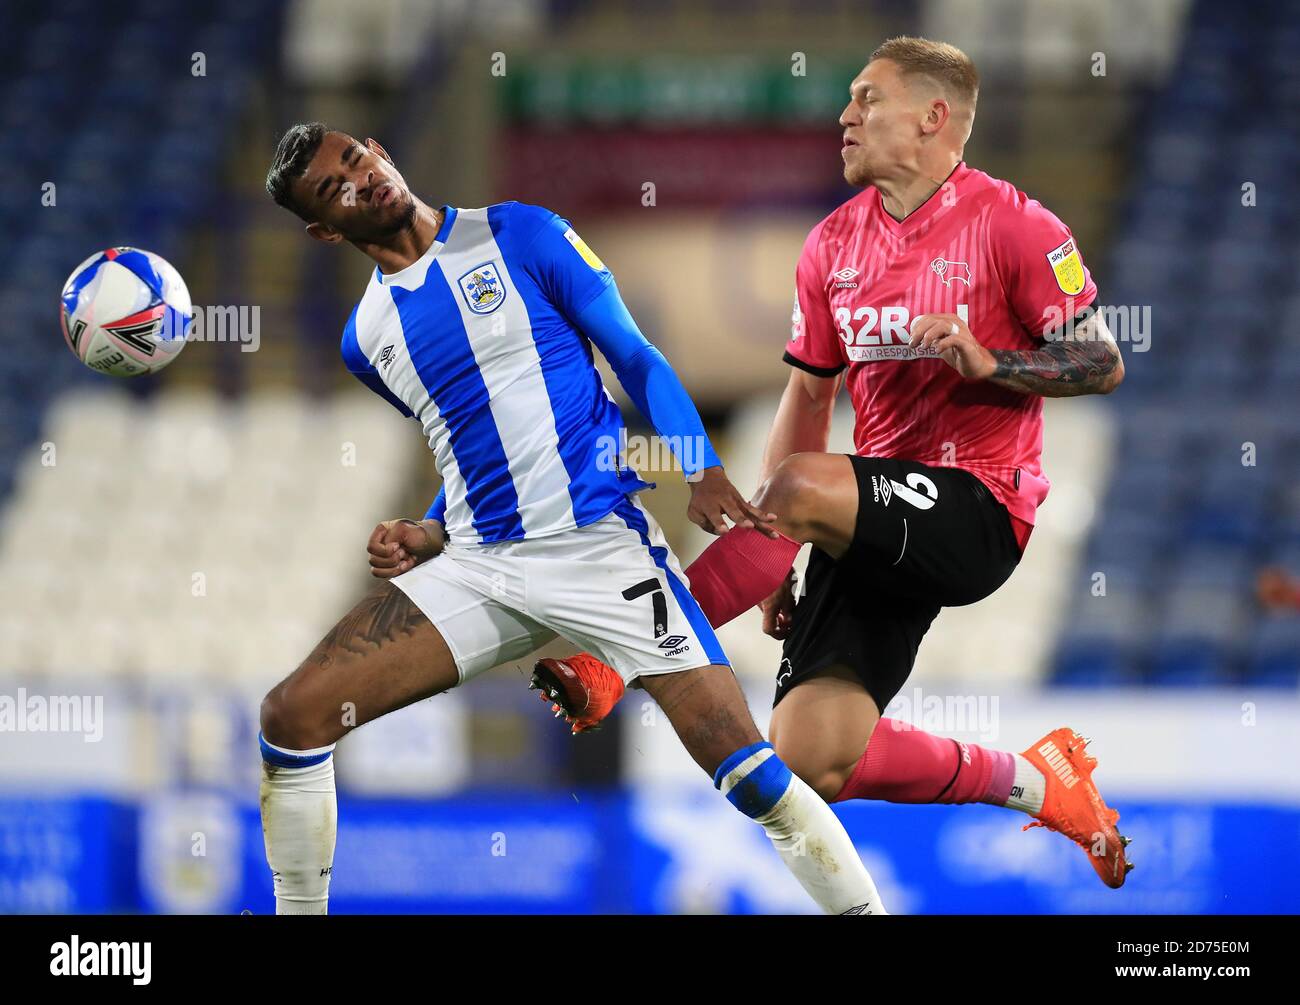 Derby County's Martyn Waghorn (right) and Huddersfield Town's Juninho Bacuna battle for the ball during the Sky Bet Championship match at The John Smith's Stadium, Huddersfield. Stock Photo